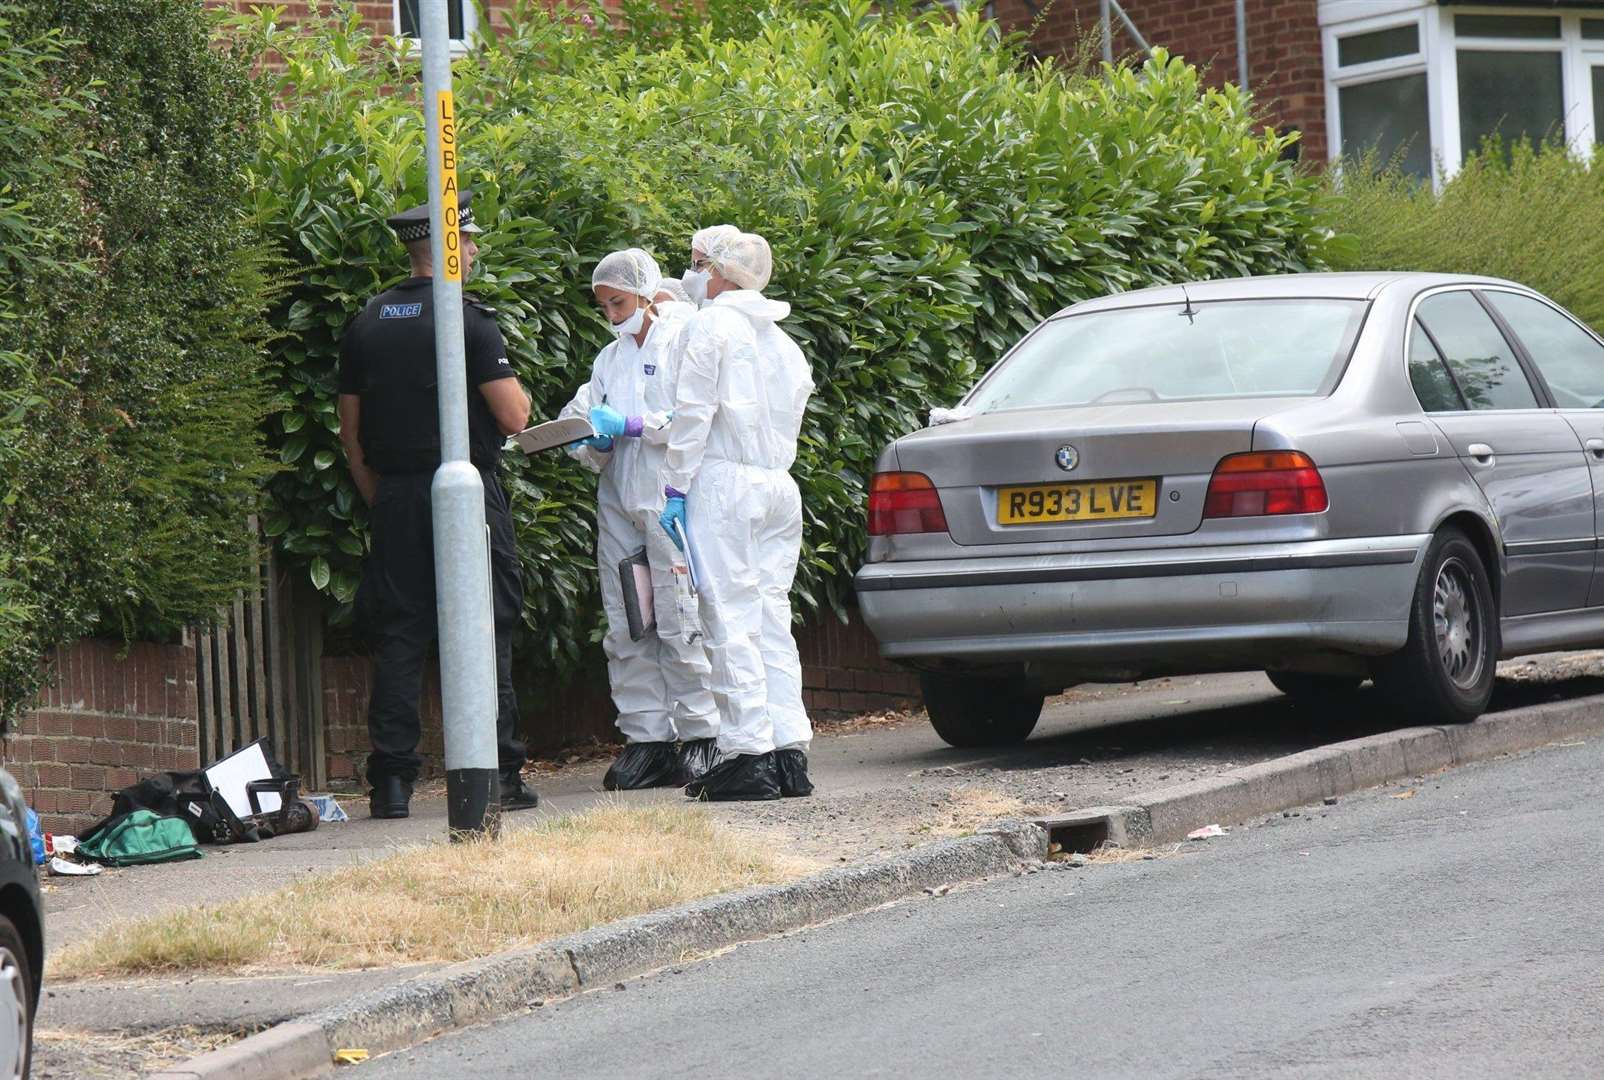 Forensics at the address. Image: UK News in Pictures